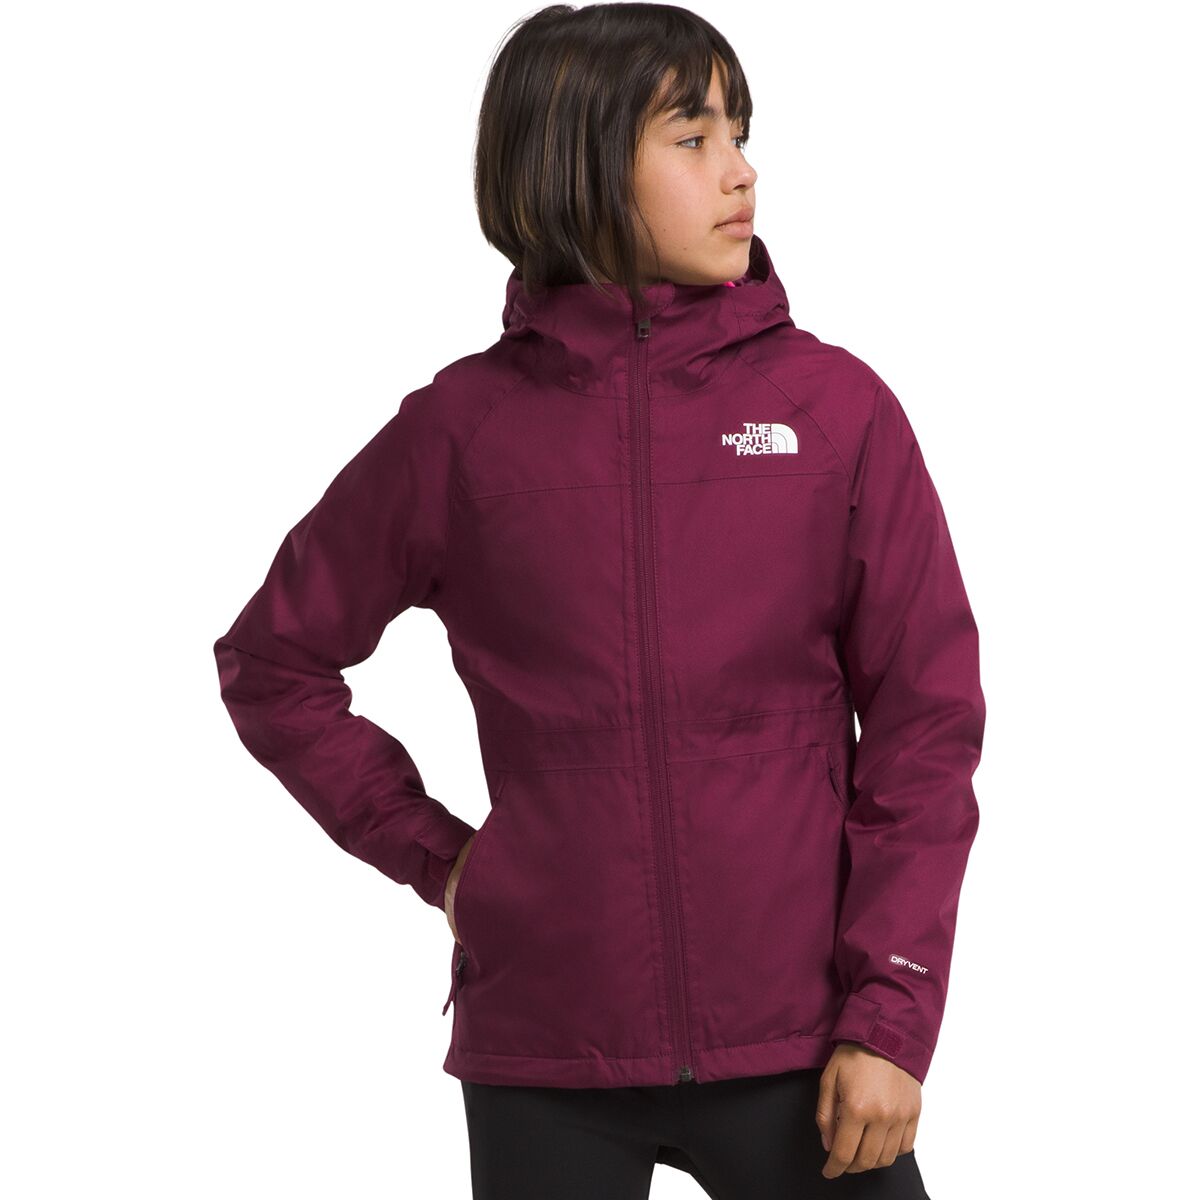 The North Face Vortex Triclimate Jacket - Girls' Boysenberry